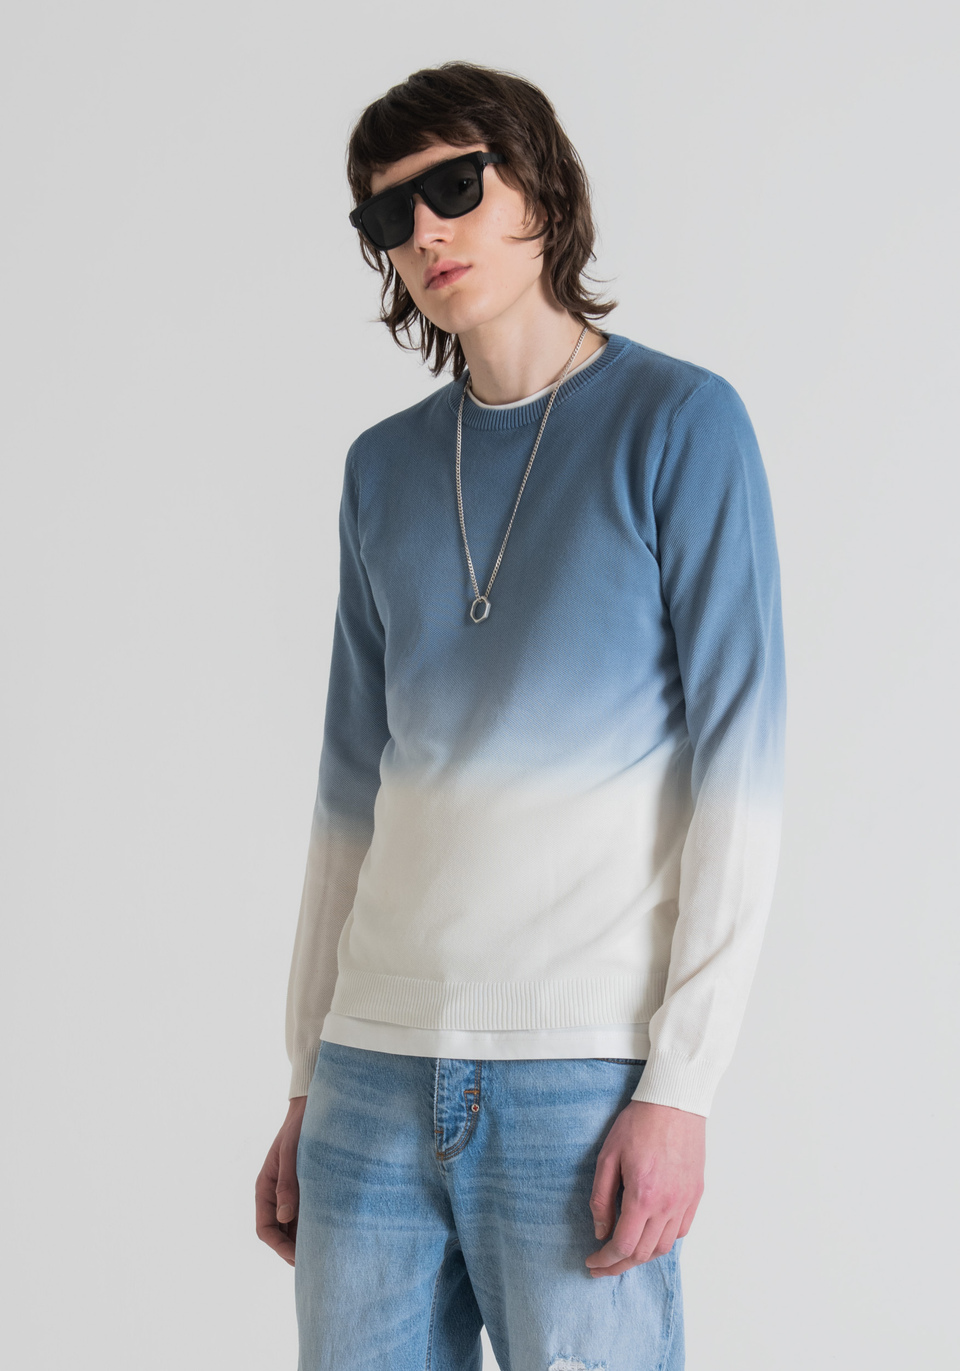 SLIM-FIT JUMPER IN PURE COTTON WITH TIE-DYE EFFECT - Antony Morato Online Shop